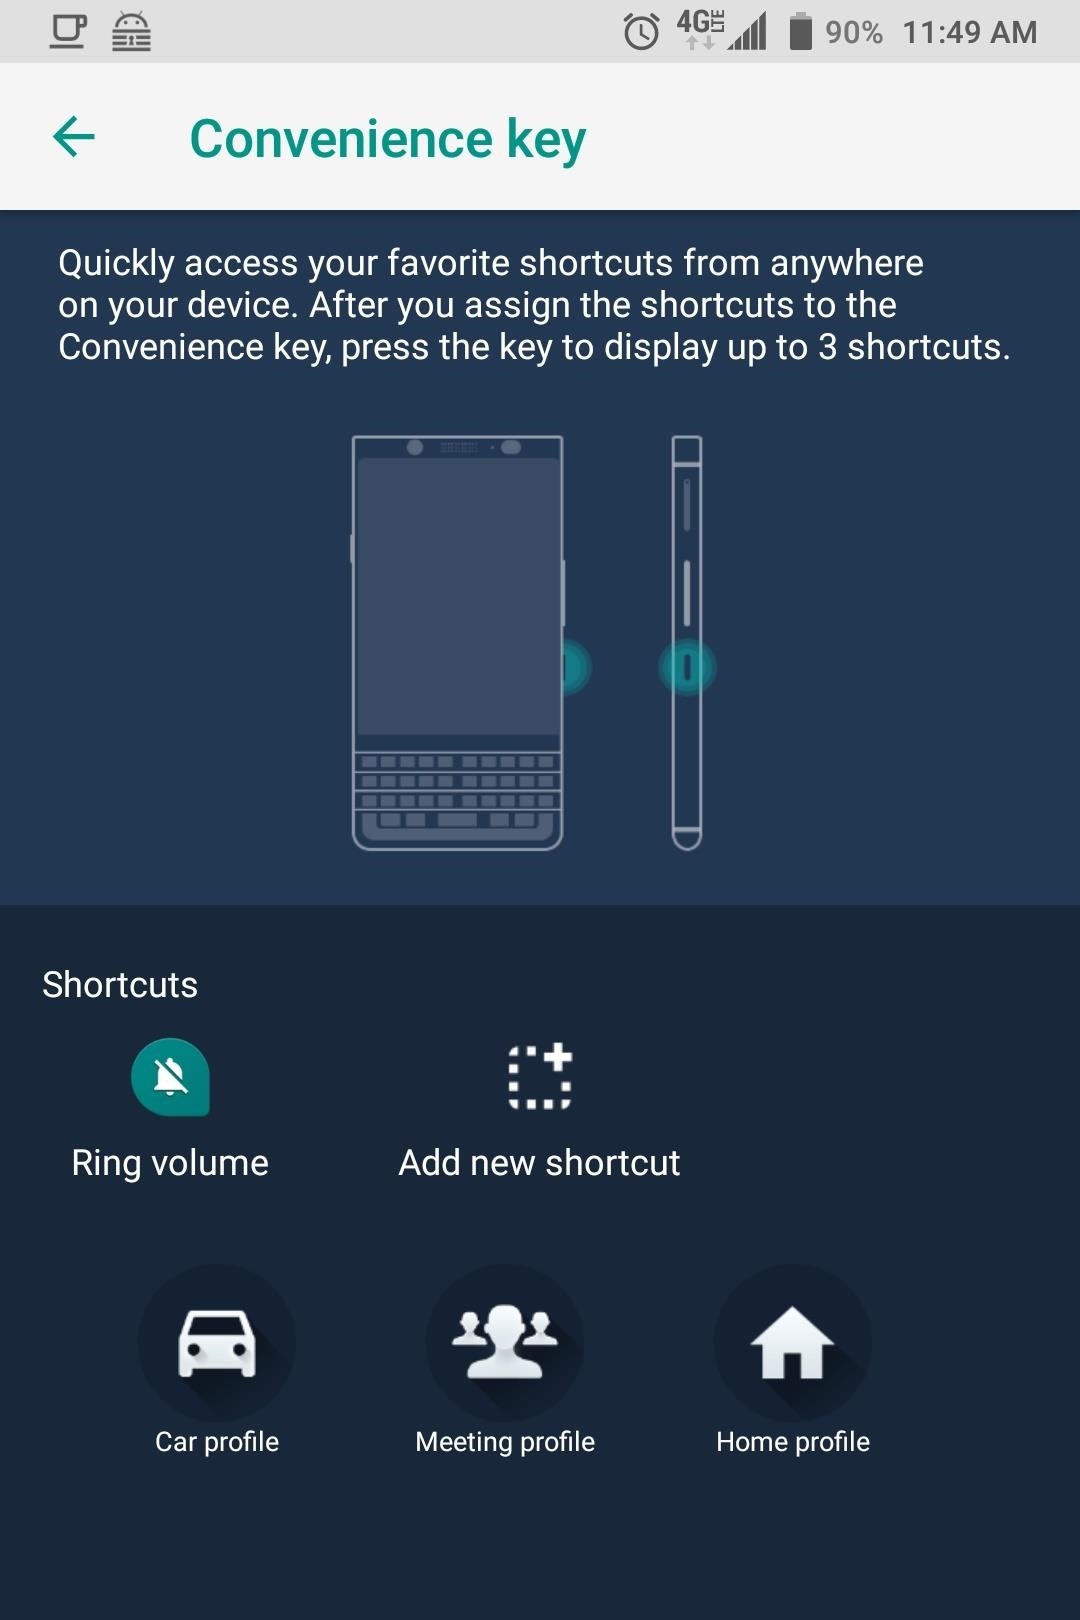 Make the BlackBerry KEY2's Convenience Key Launch Different Apps Based on Your Location